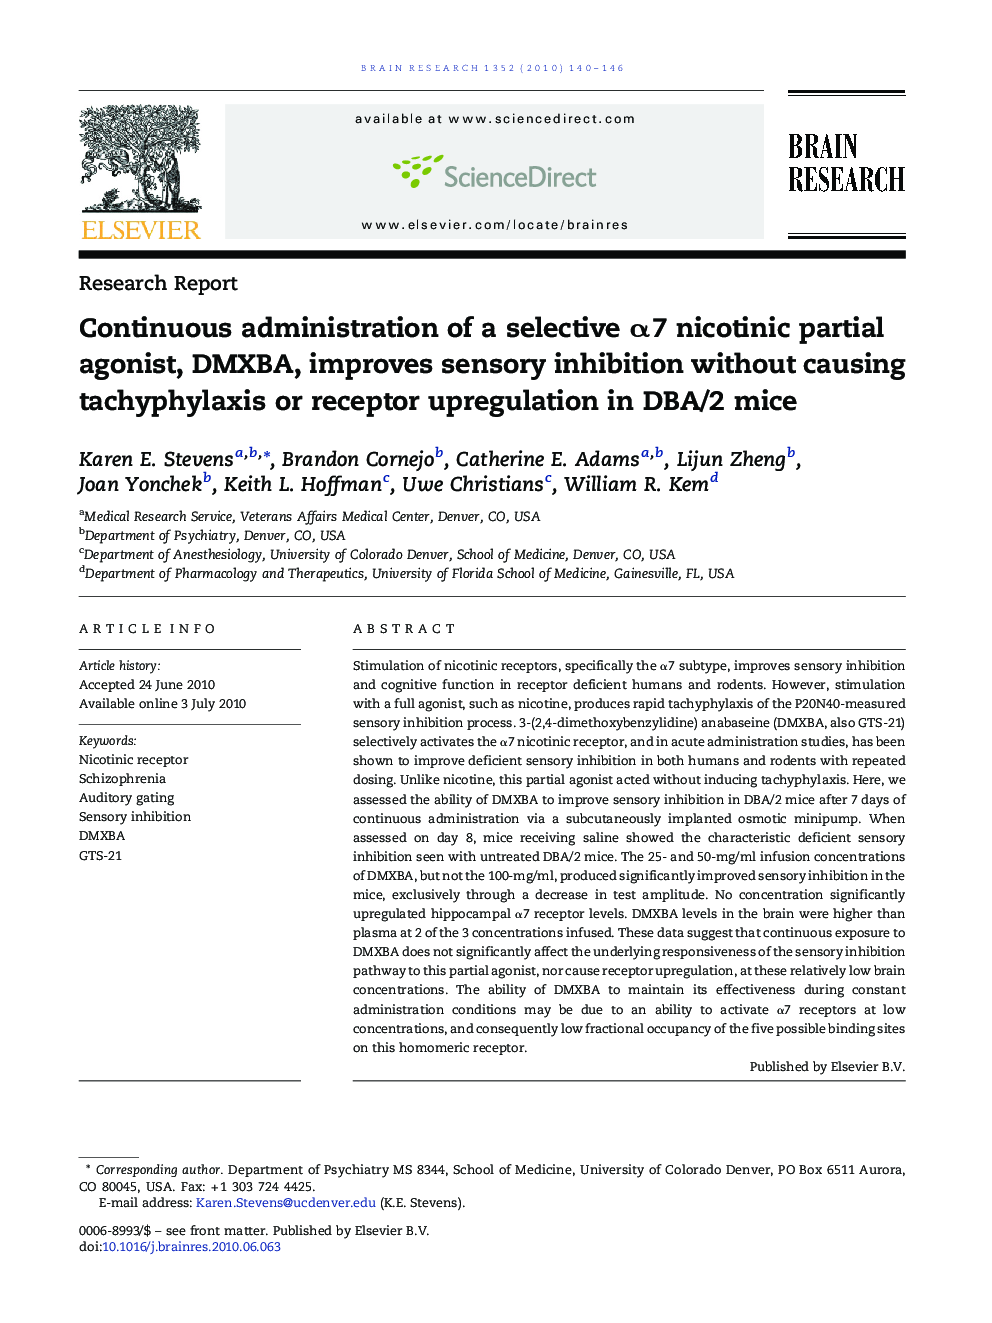 Continuous administration of a selective α7 nicotinic partial agonist, DMXBA, improves sensory inhibition without causing tachyphylaxis or receptor upregulation in DBA/2 mice